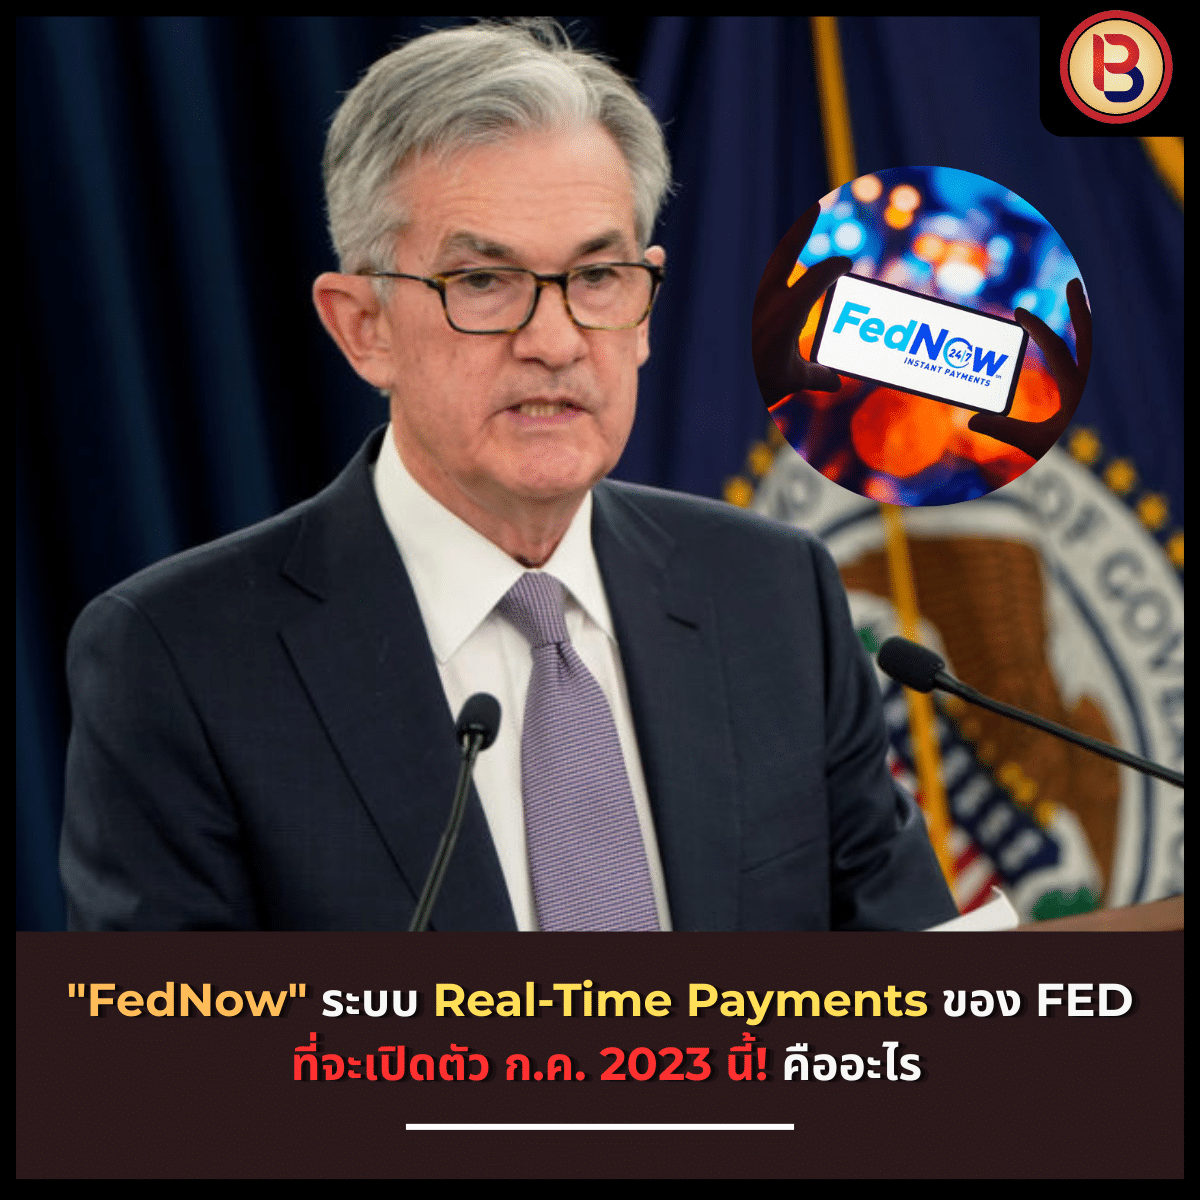 “FedNow” ระบบ Real-Time Payments ของ FED คืออะไร